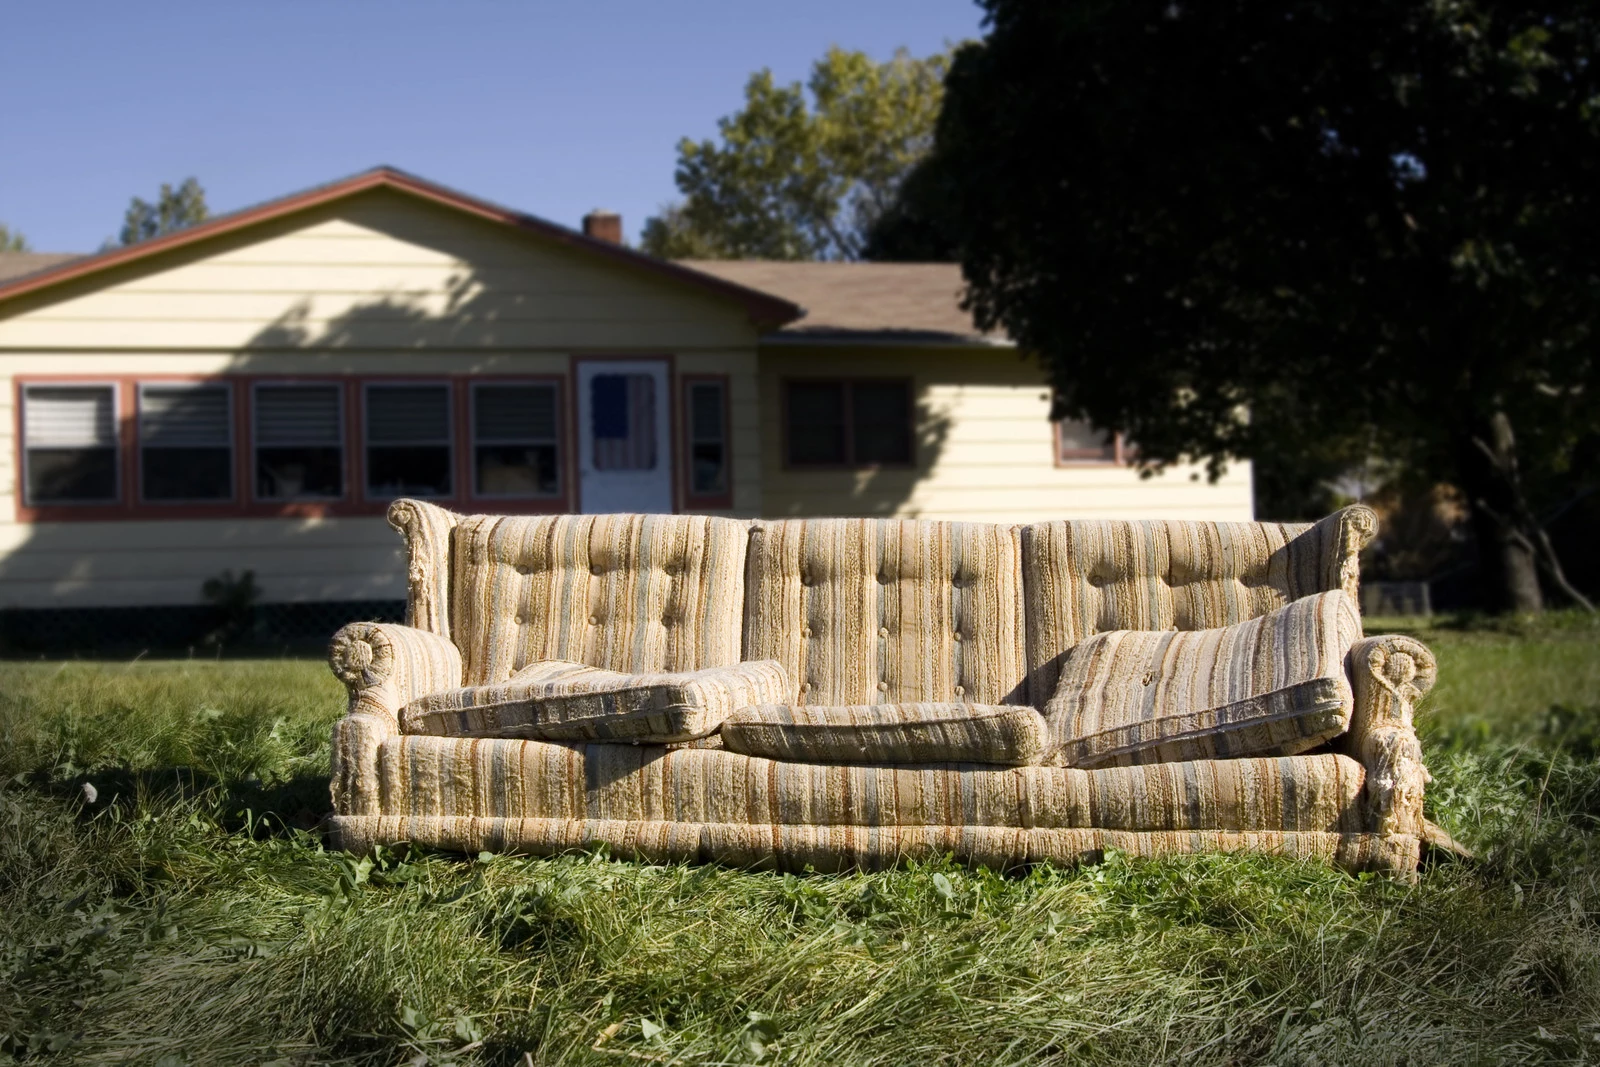 Is it Illegal to Use 'Indoor' Furniture Outdoors in St. Cloud?